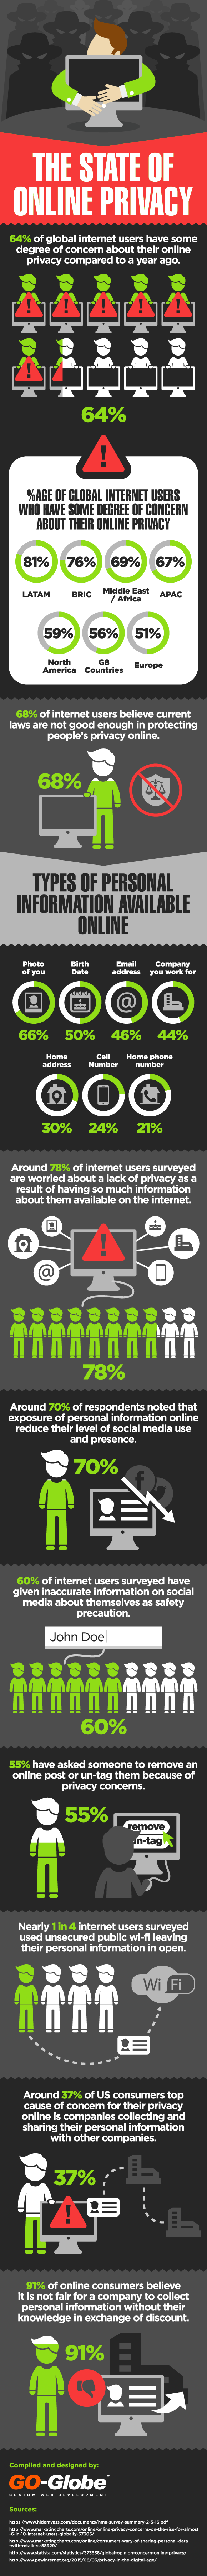 The State Of Online Privacy - Statistics 